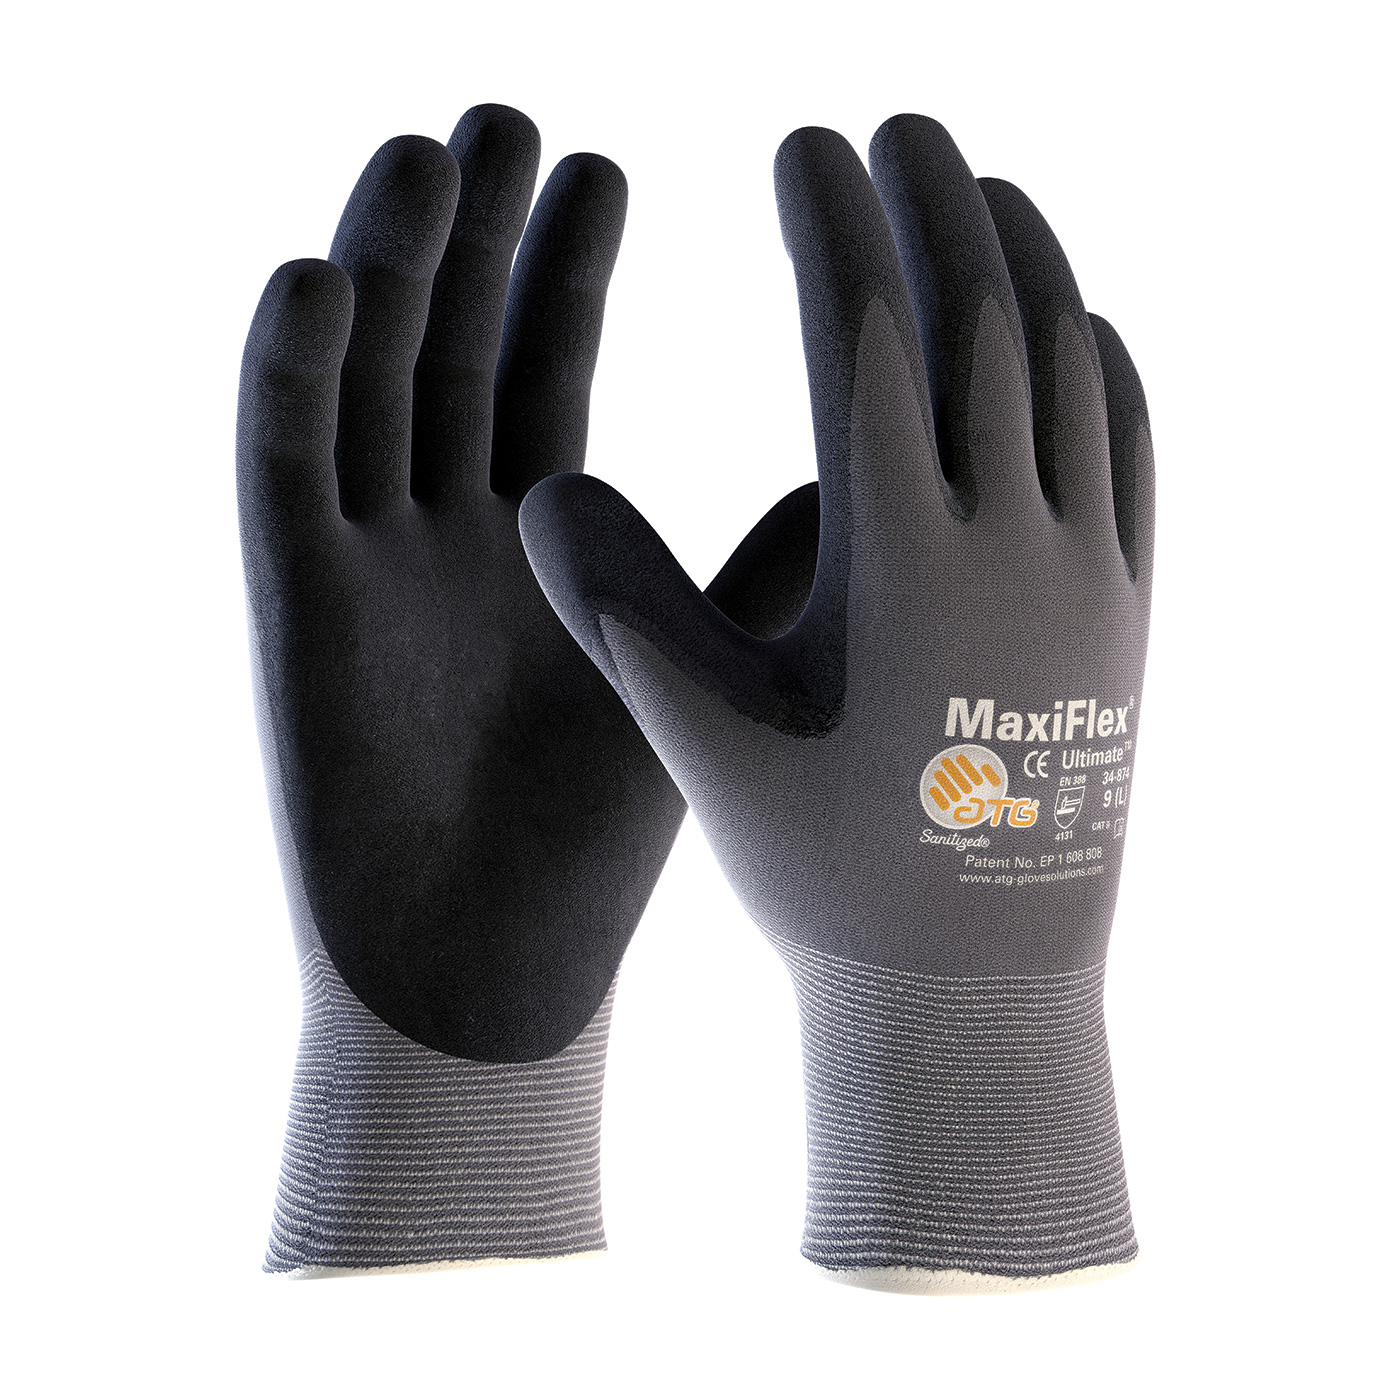 PIP 34-874/M MaxiFlex Ultimate Seamless Knit Nylon/Lycra Glove with Nitrile Coated MicroFoam Grip on Palm & Fingers - Medium PID-34 874 M